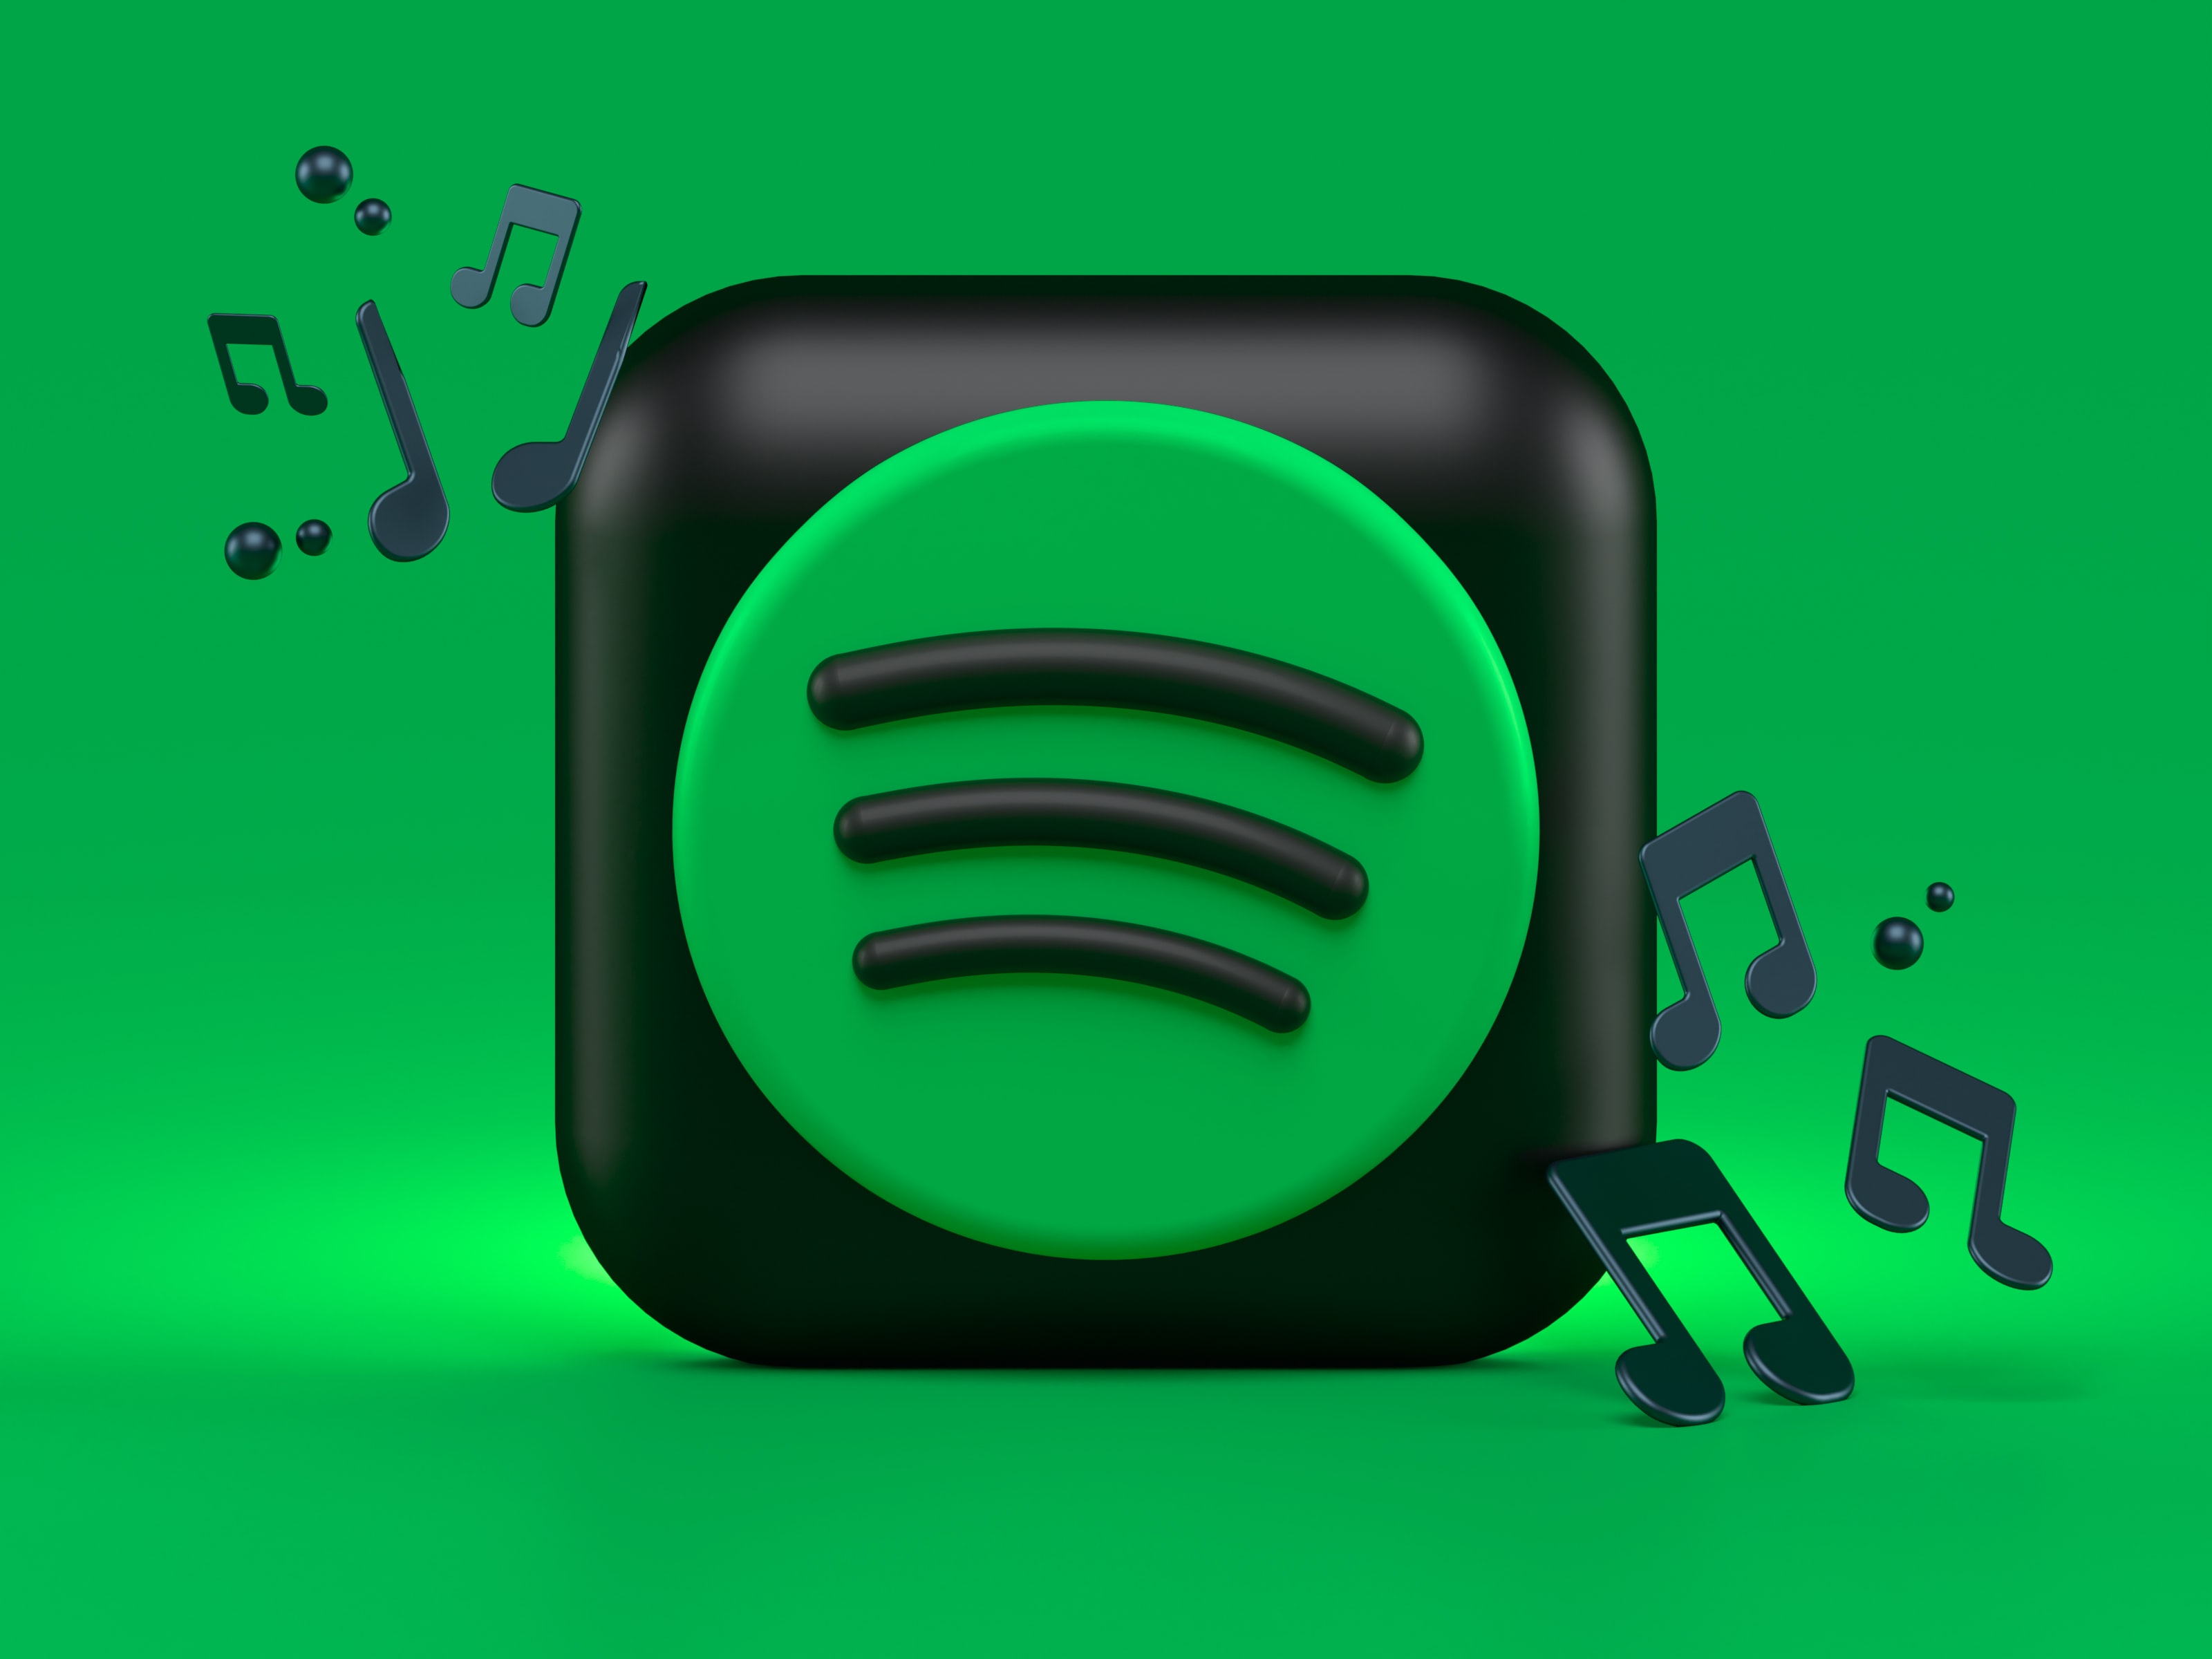 How to Cancel Spotify